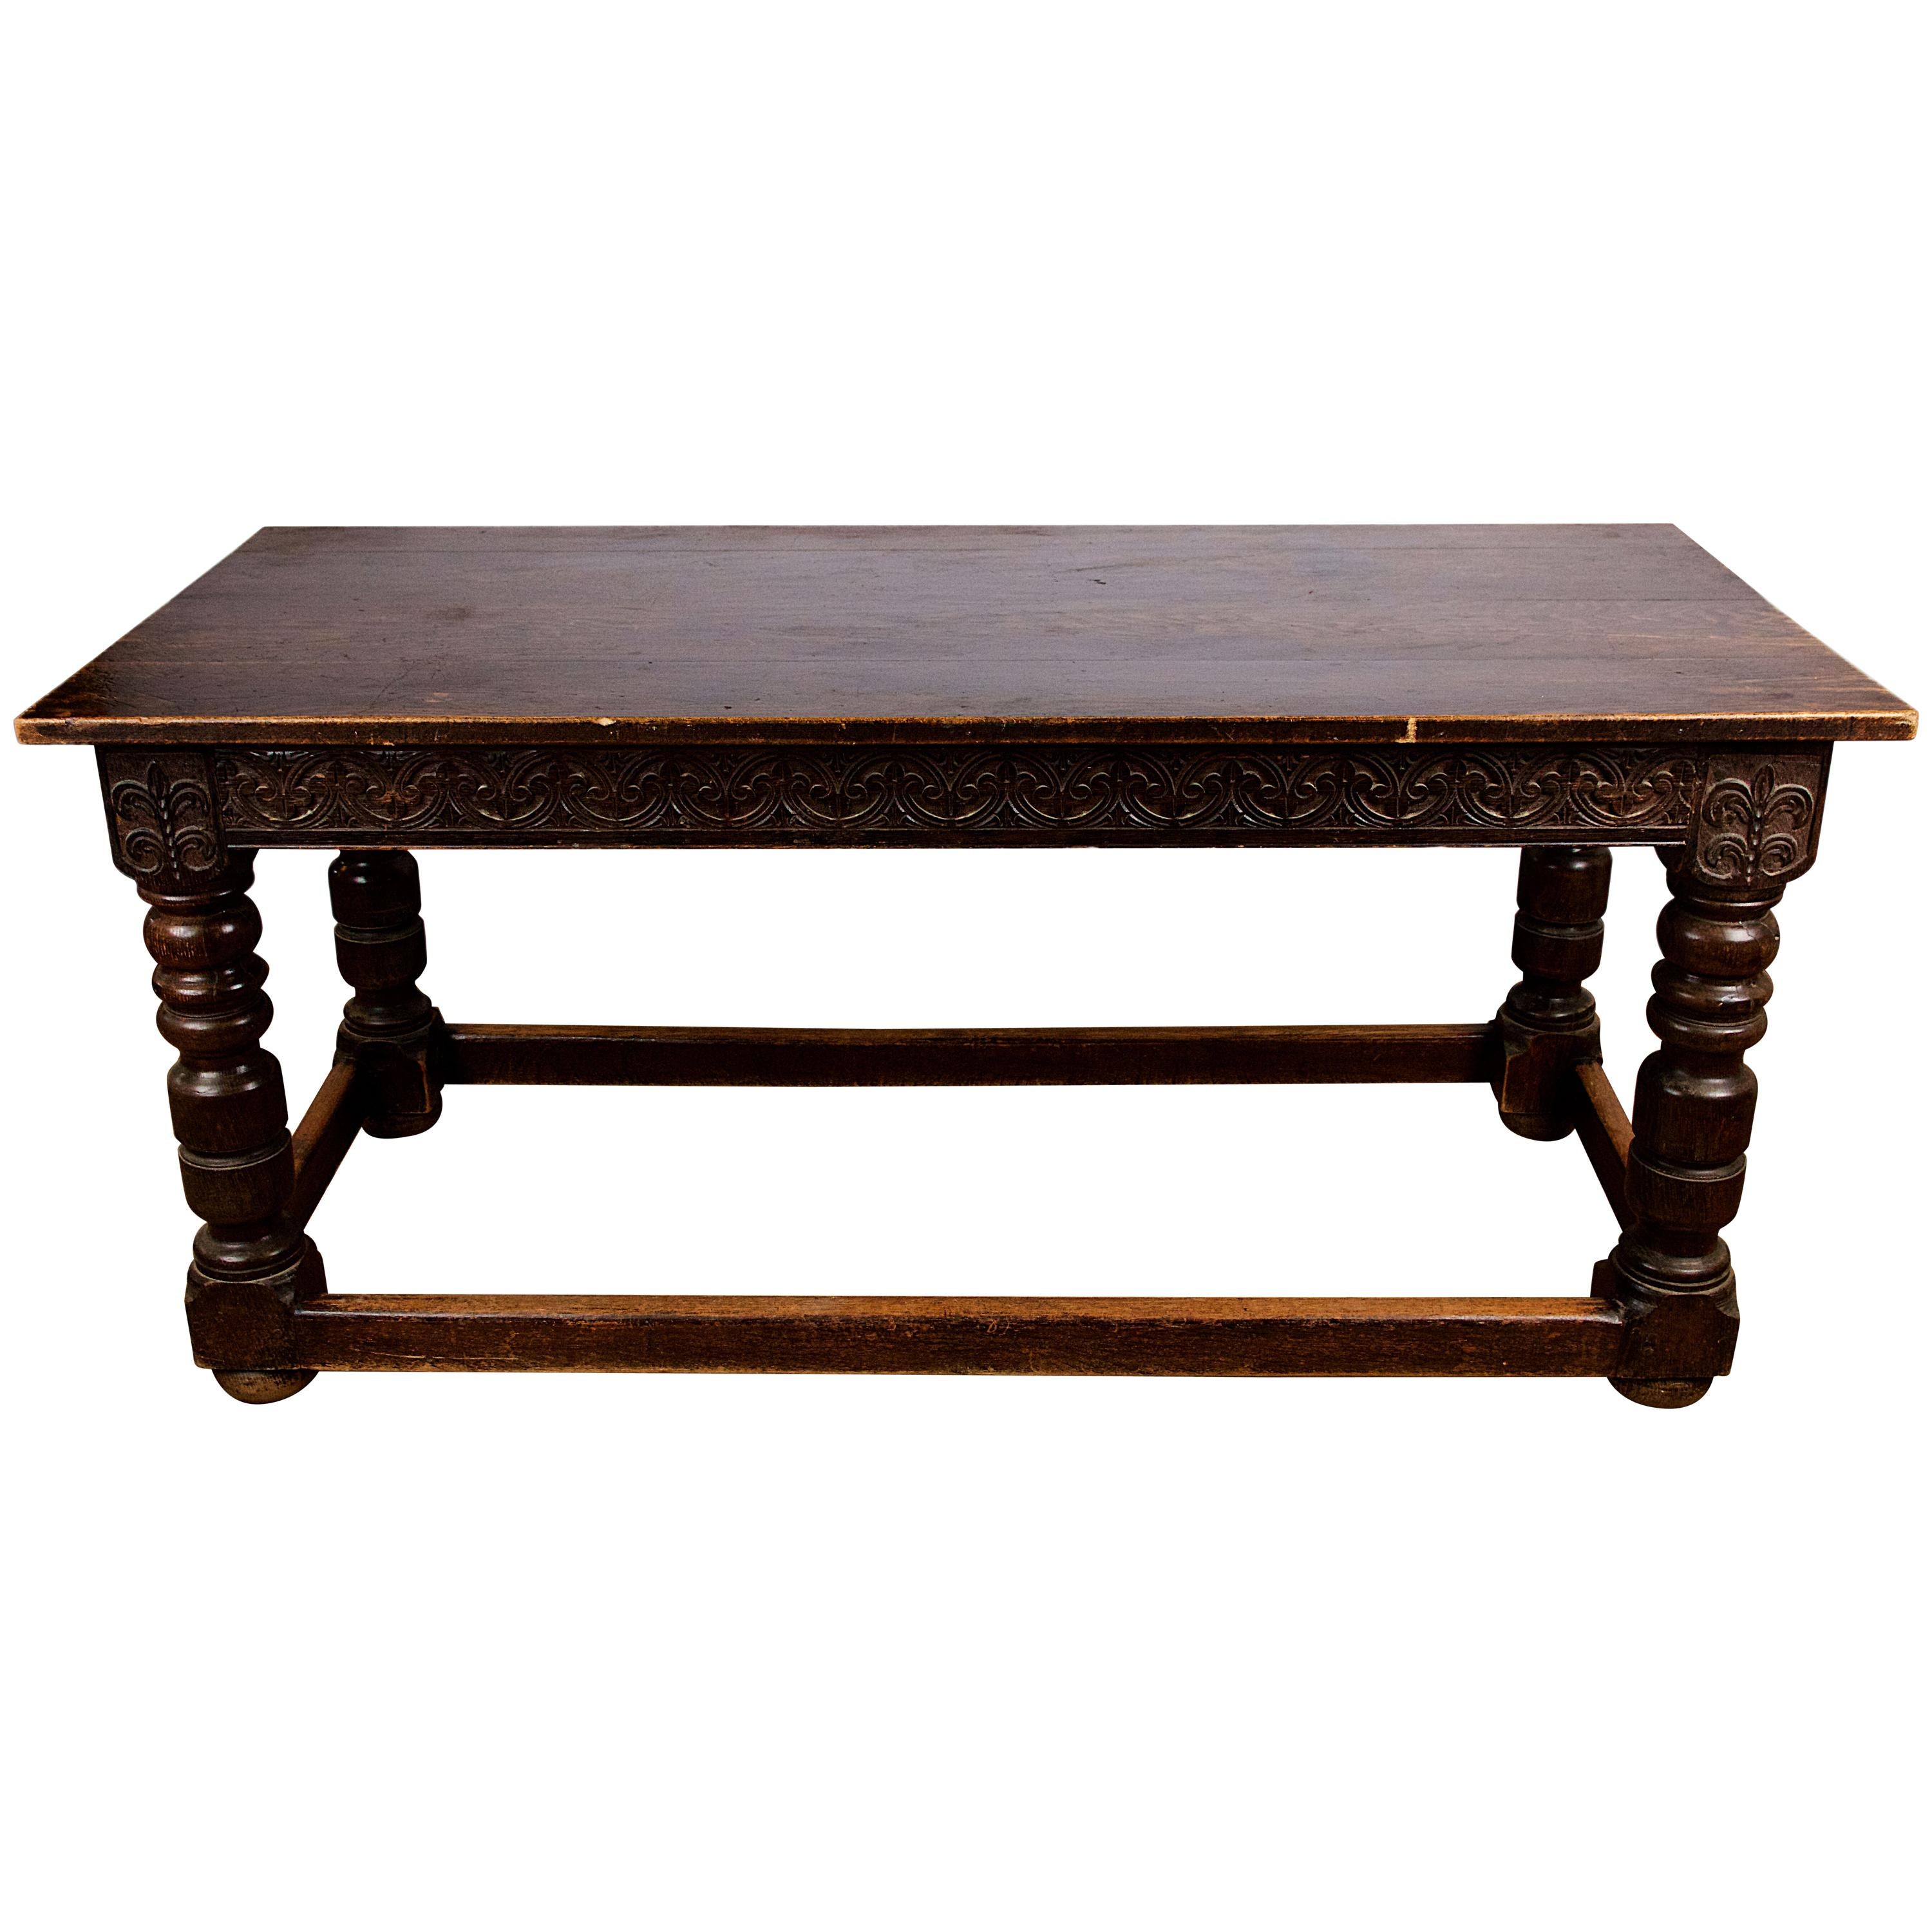 17th Century English Carved Oak Refectory Table, circa 1680